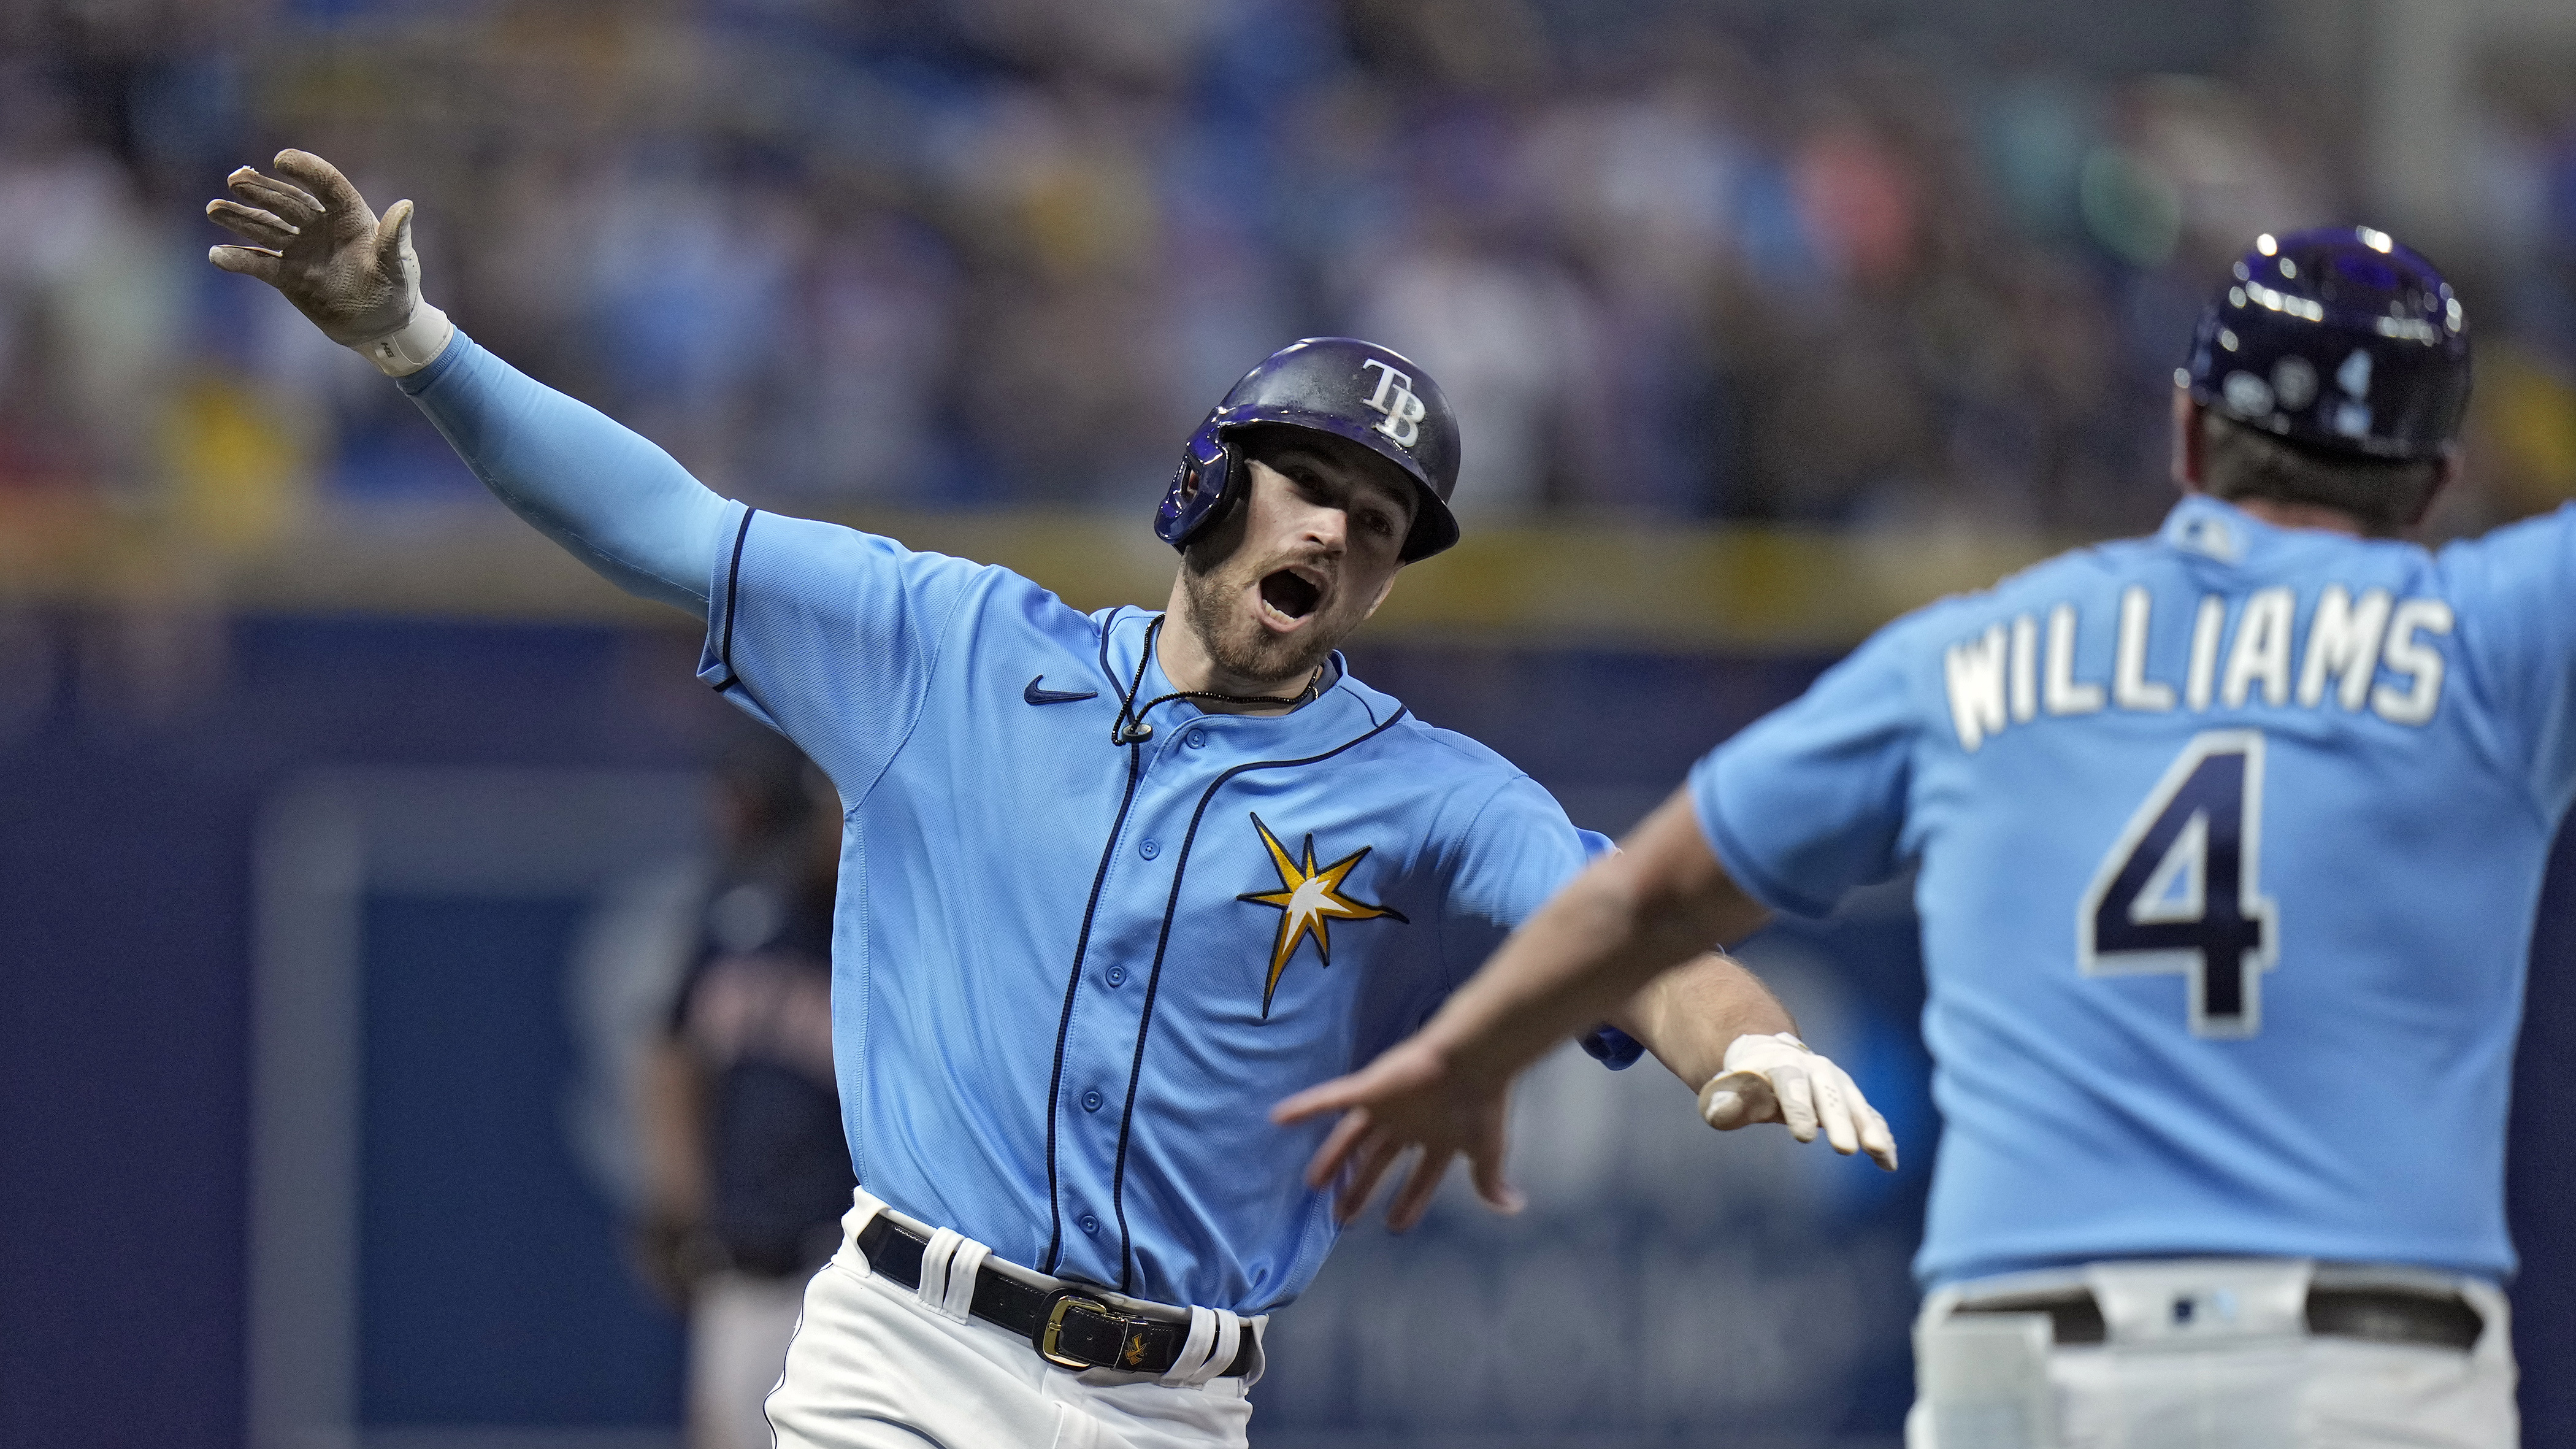 Tampa Bay radio host calls out New York broadcaster who said Rays